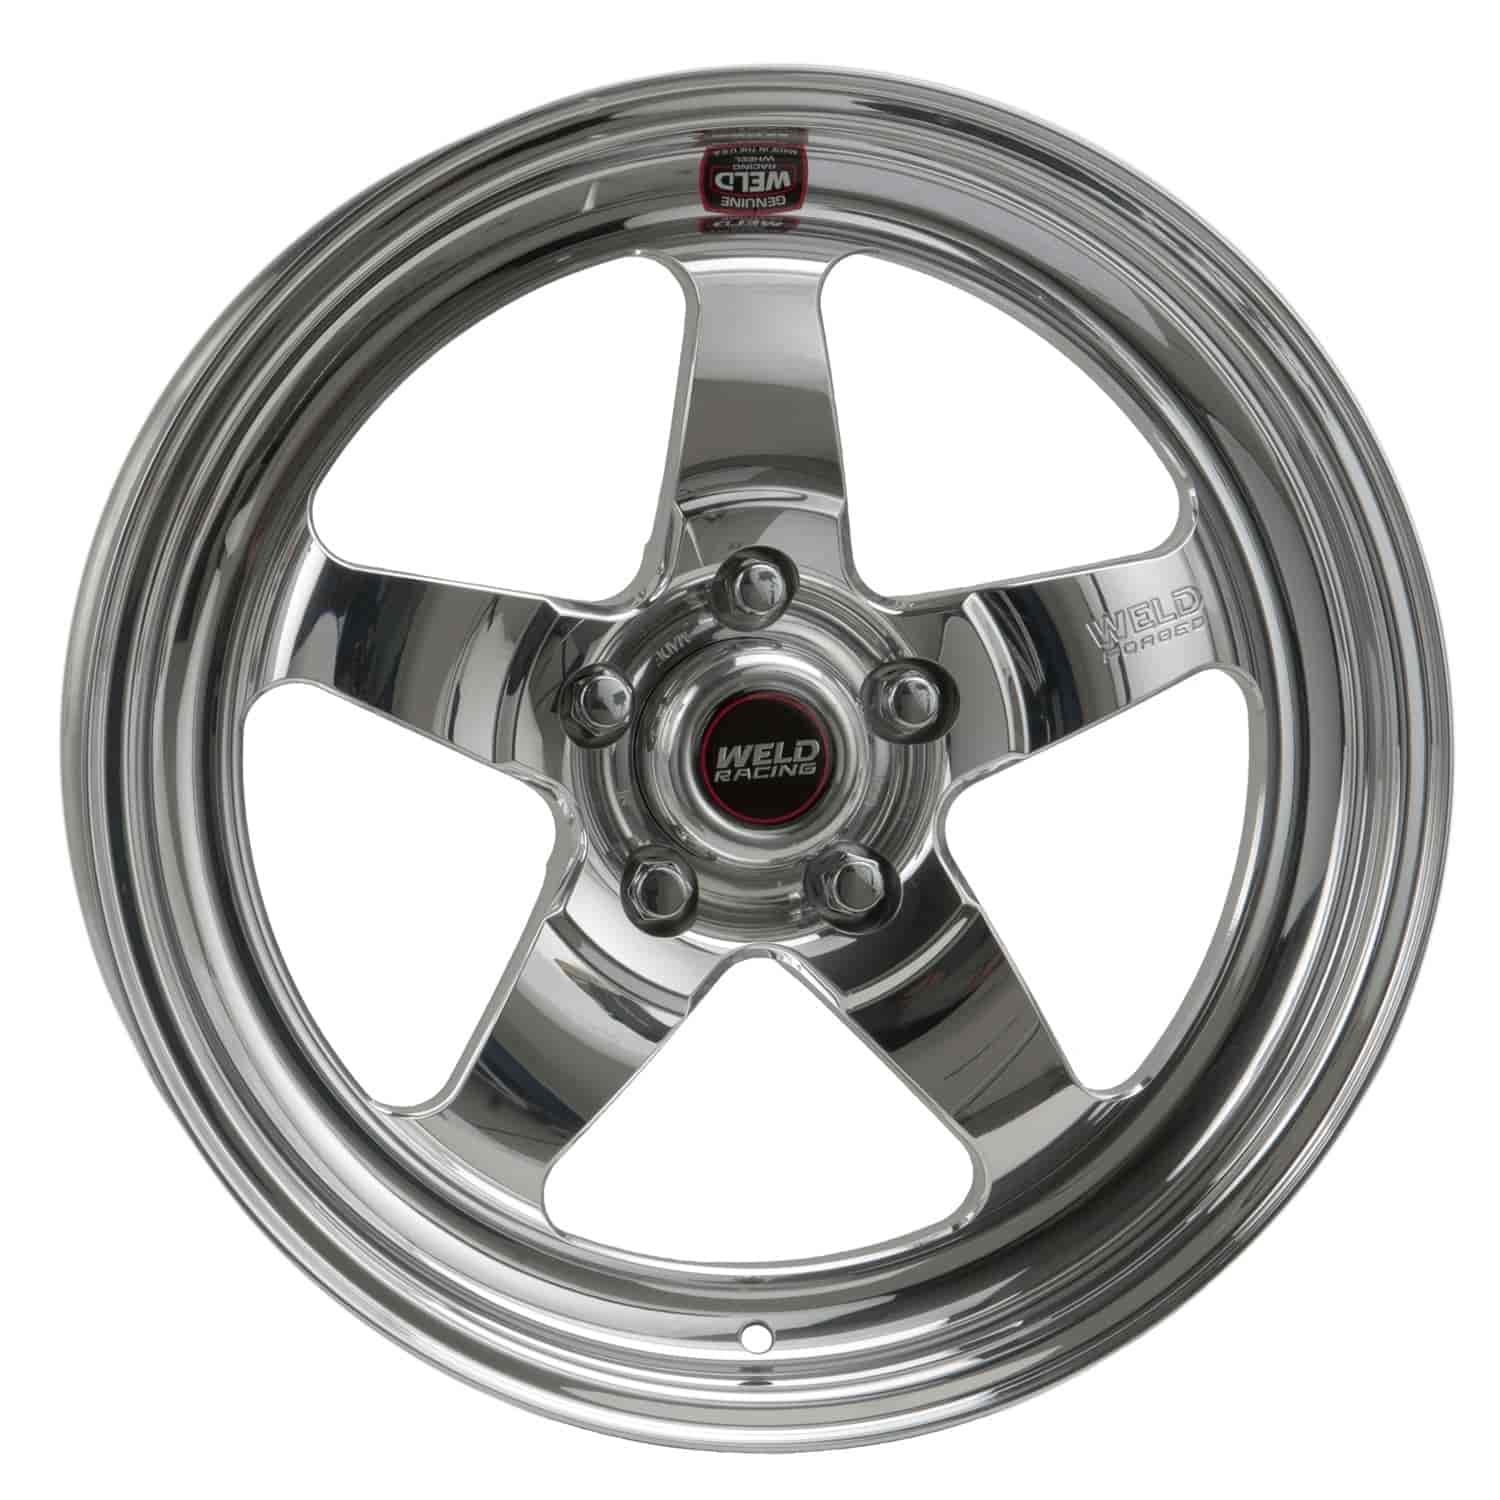 RT-S Series Wheel Size: 15" x 8" Bolt Circle: 5 x 4-3/4" Rear Spacing: 4-1/2" Offset: -3.49mm